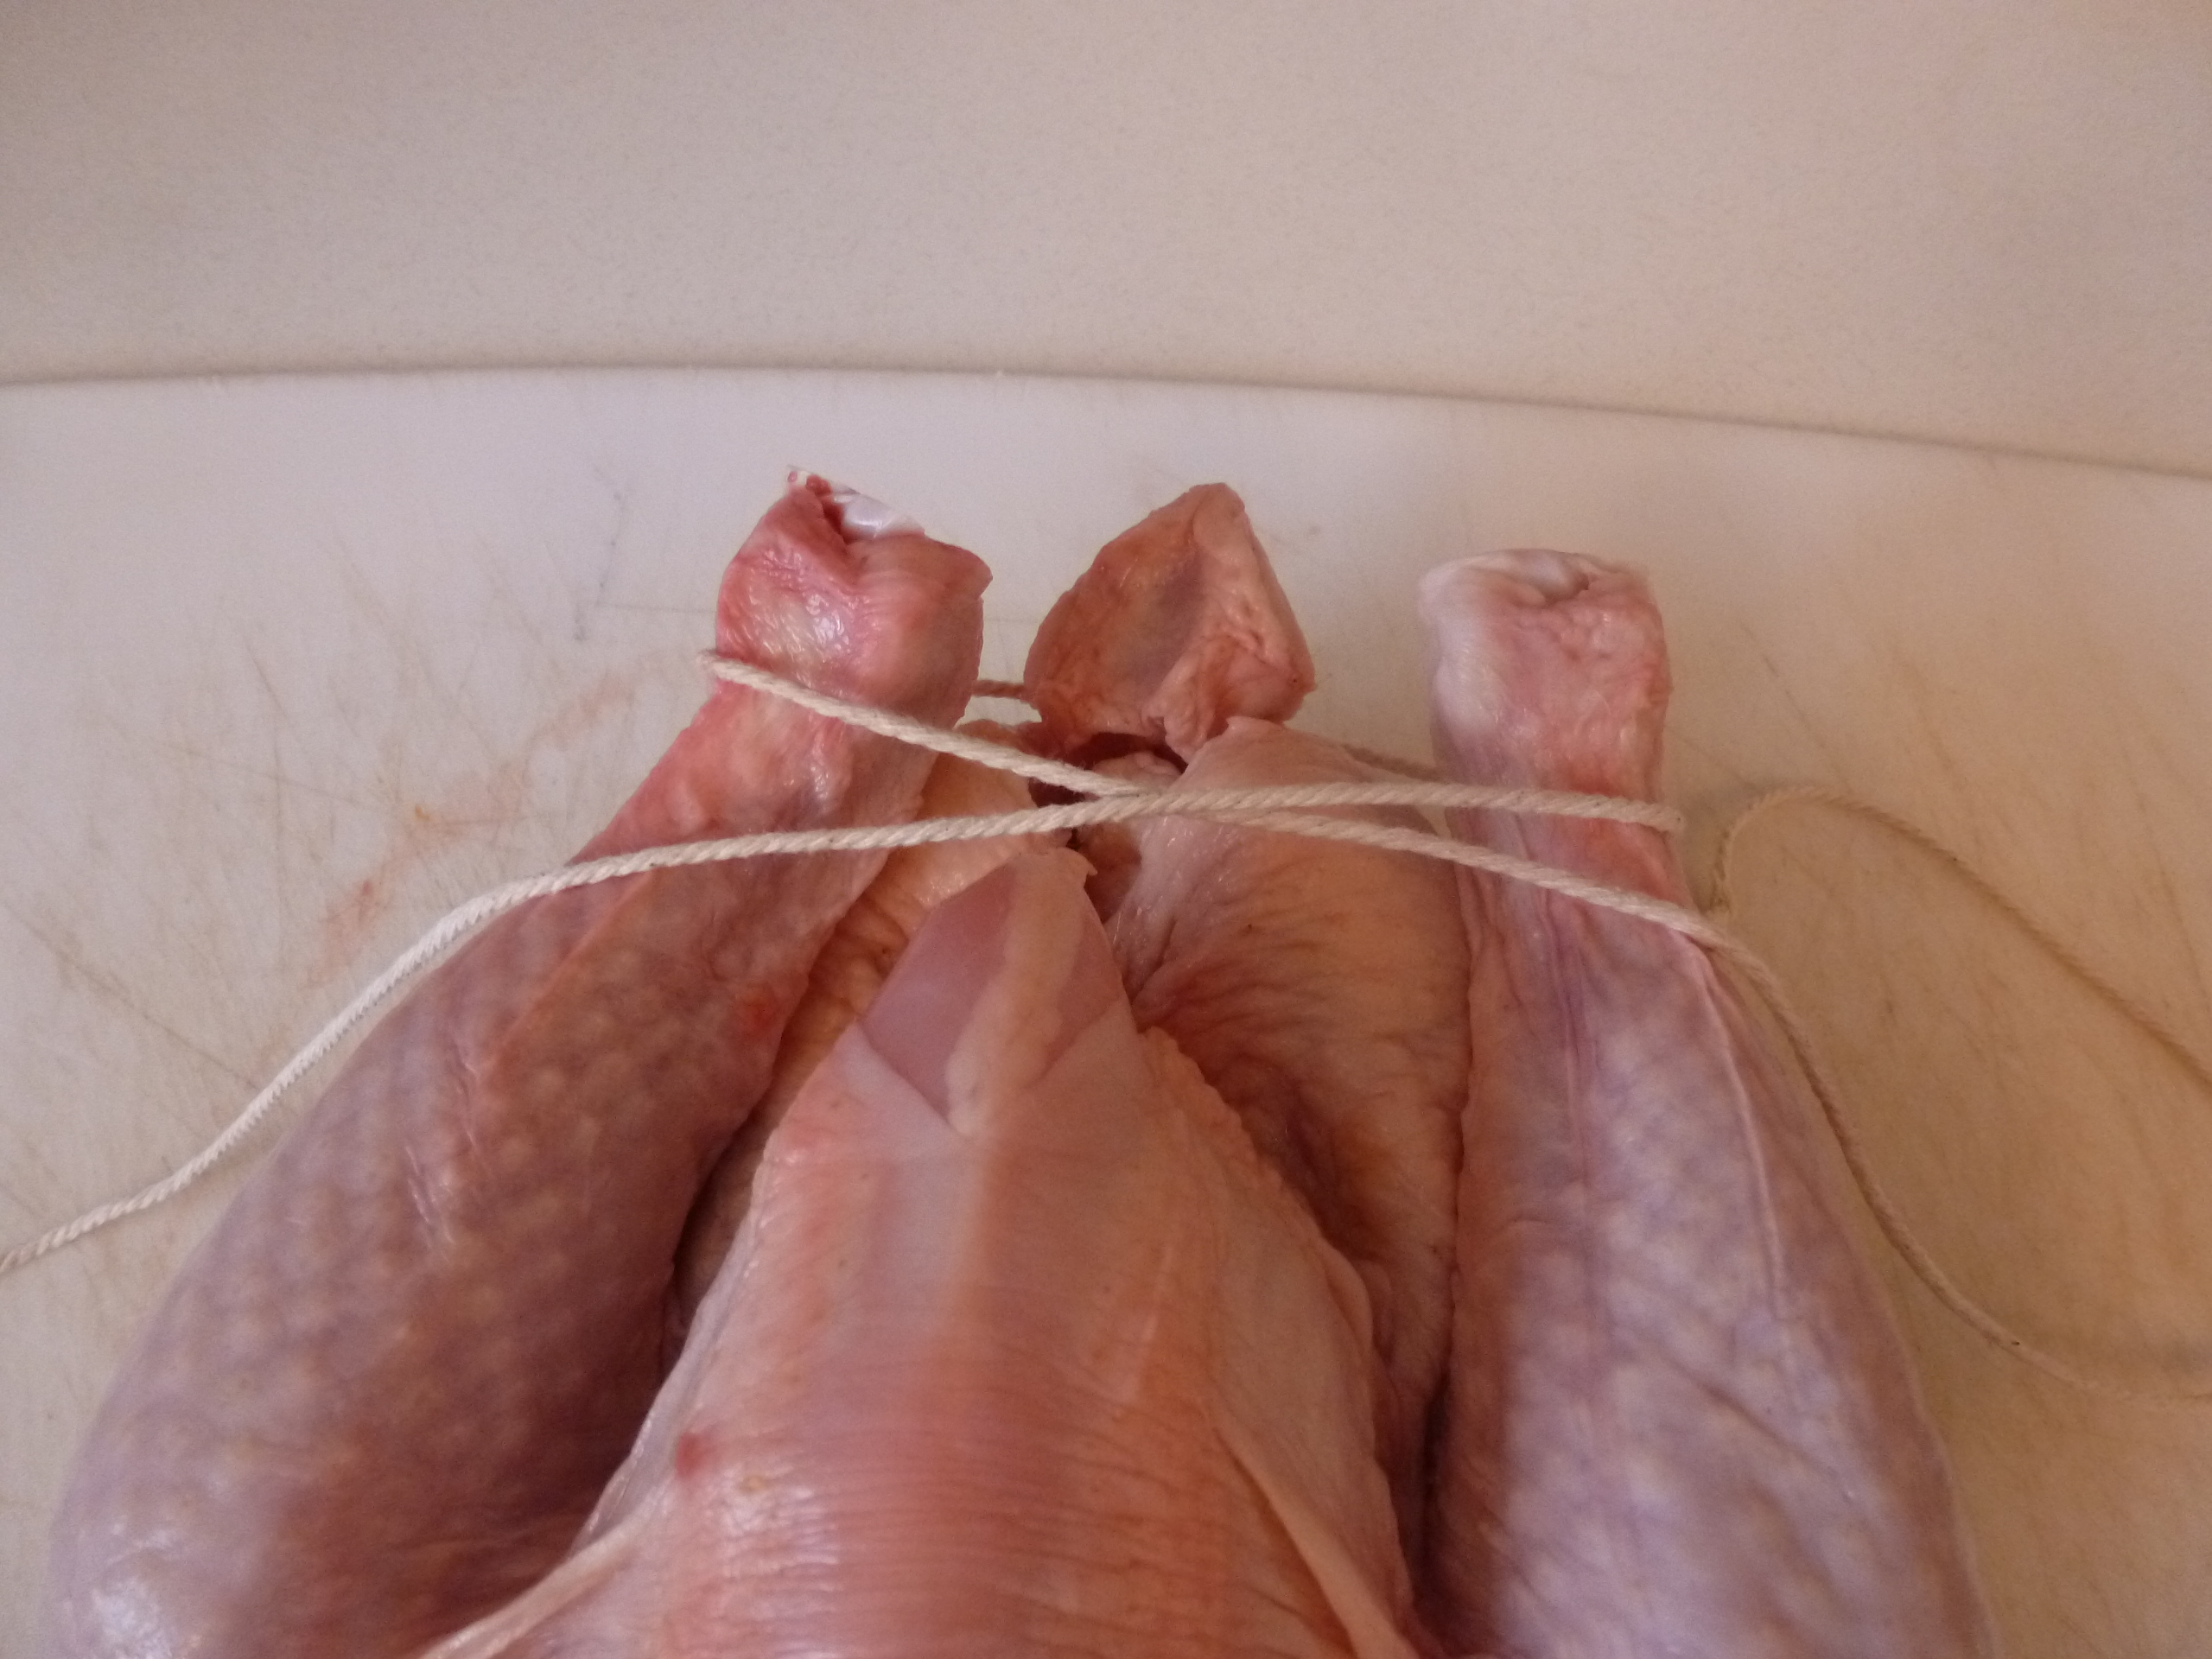 Looping twine around the chicken's tail and legs